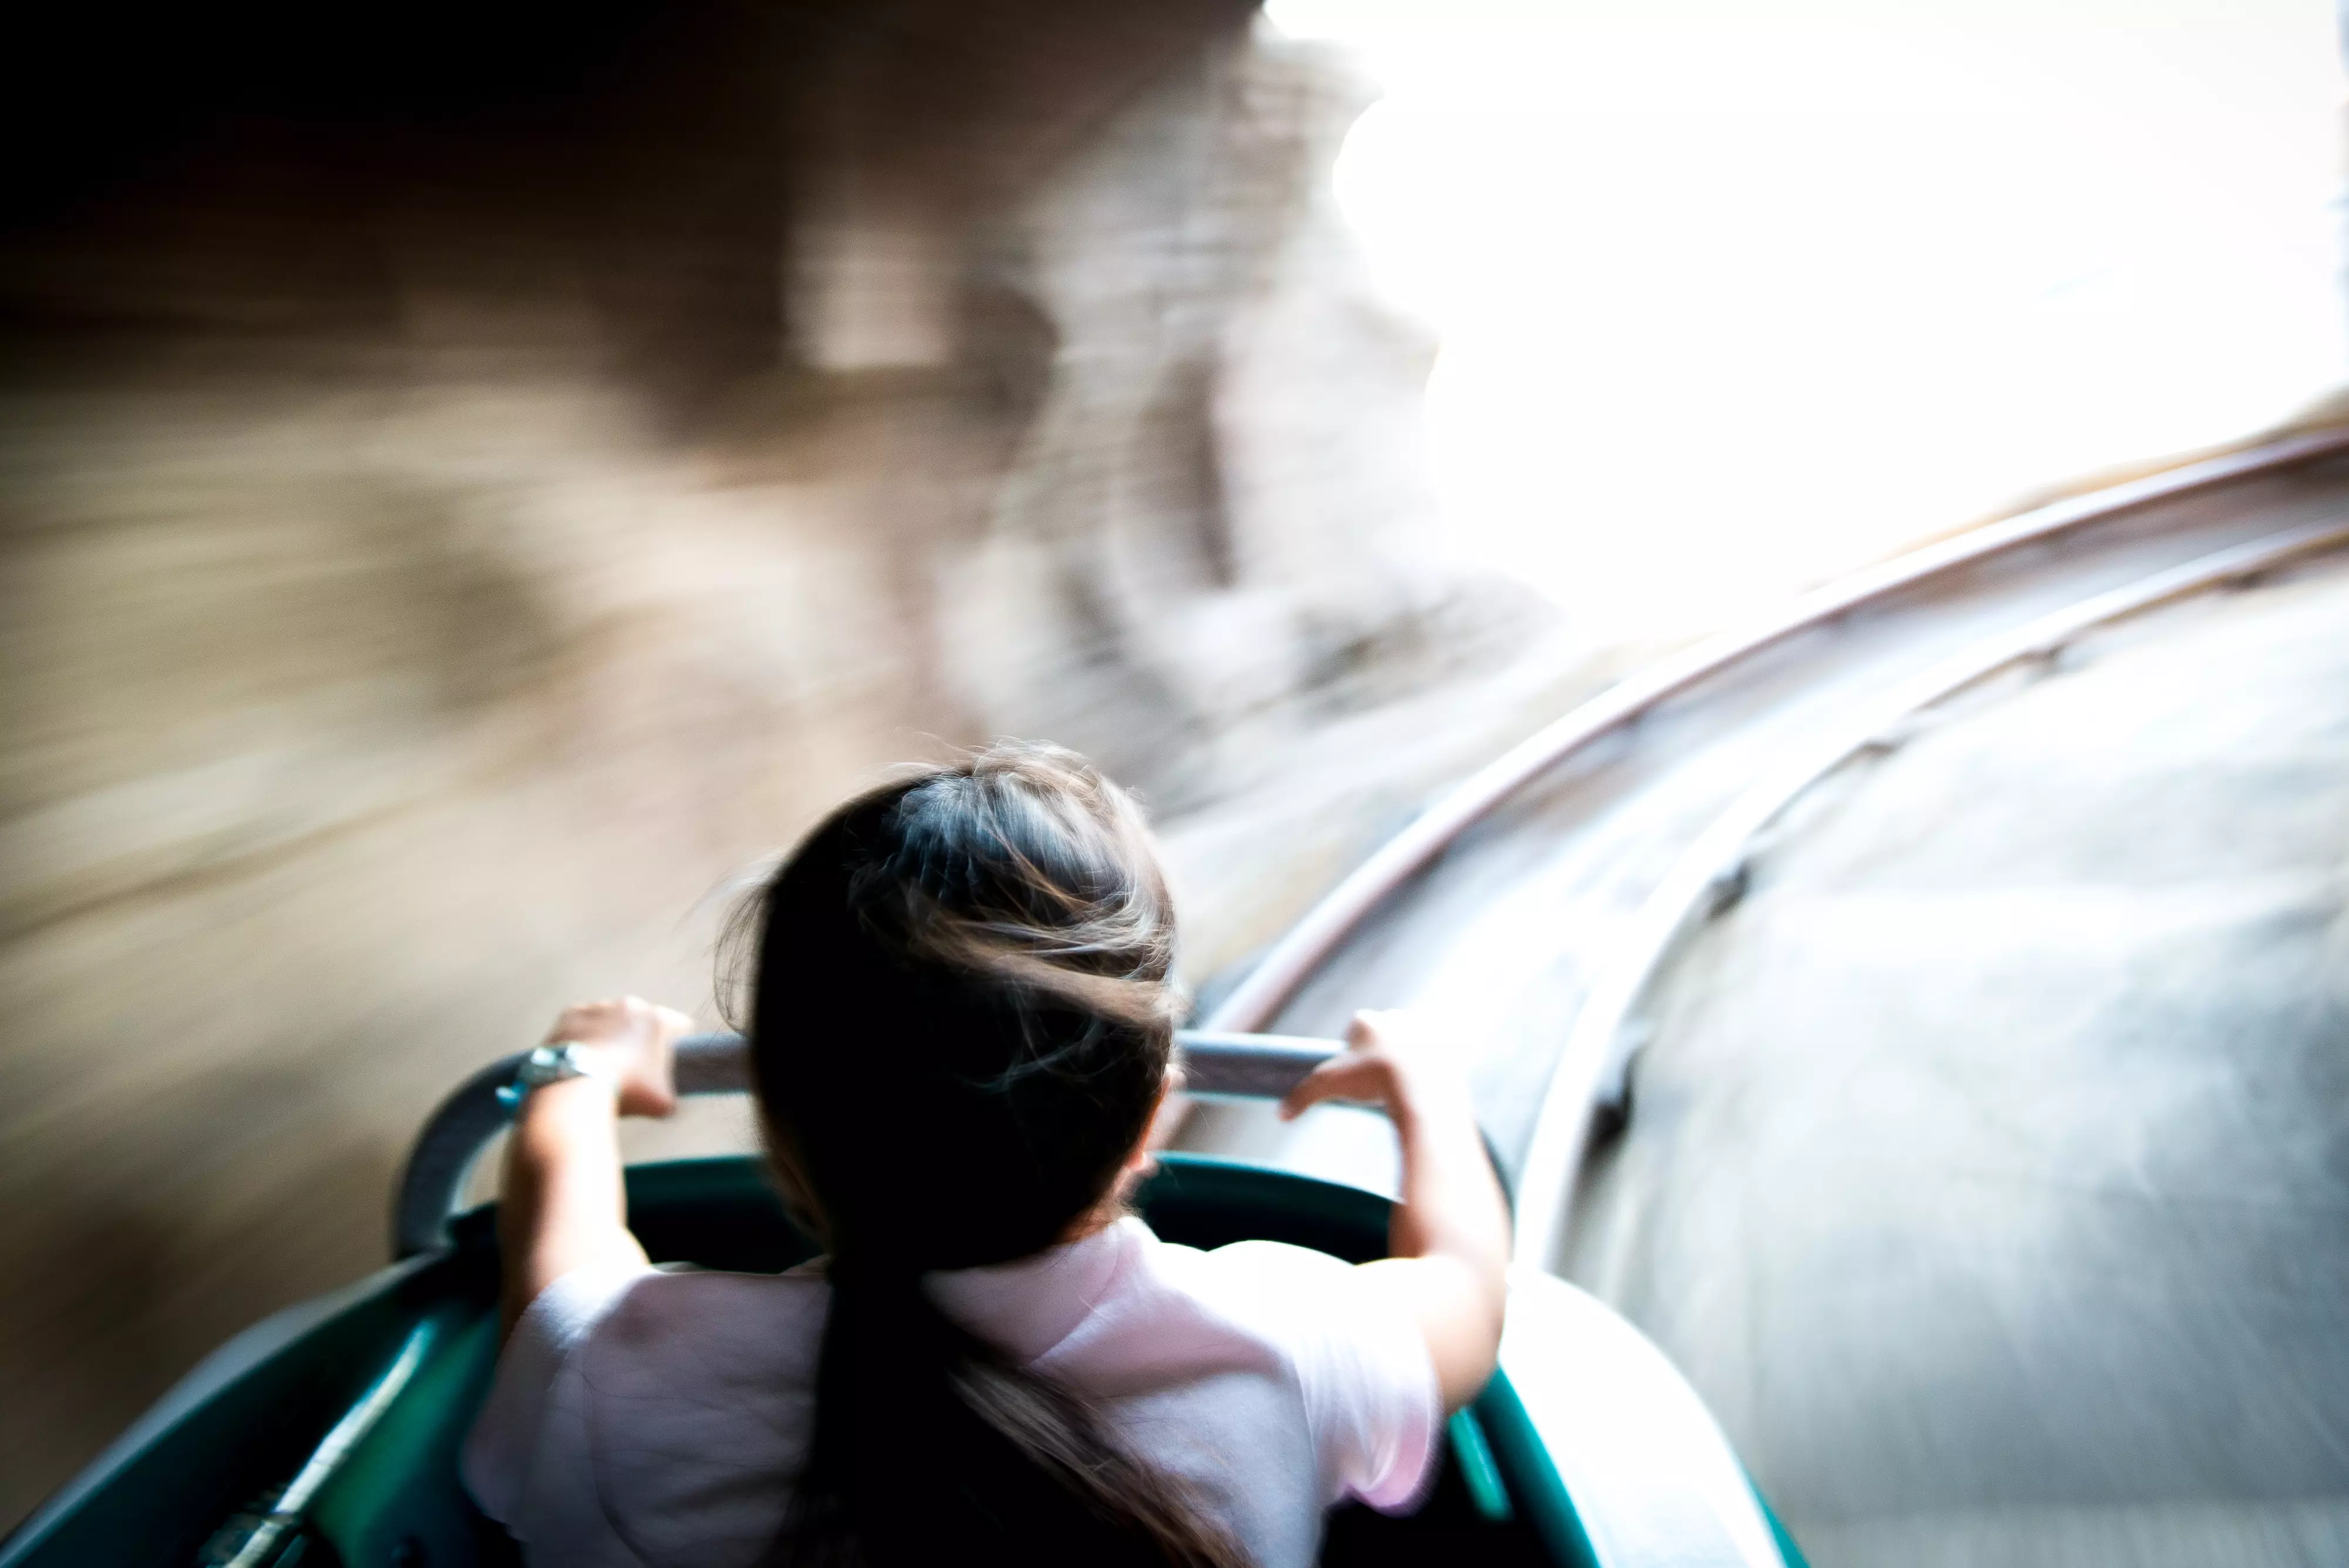 Girl on a rollercoaster moving at high speed